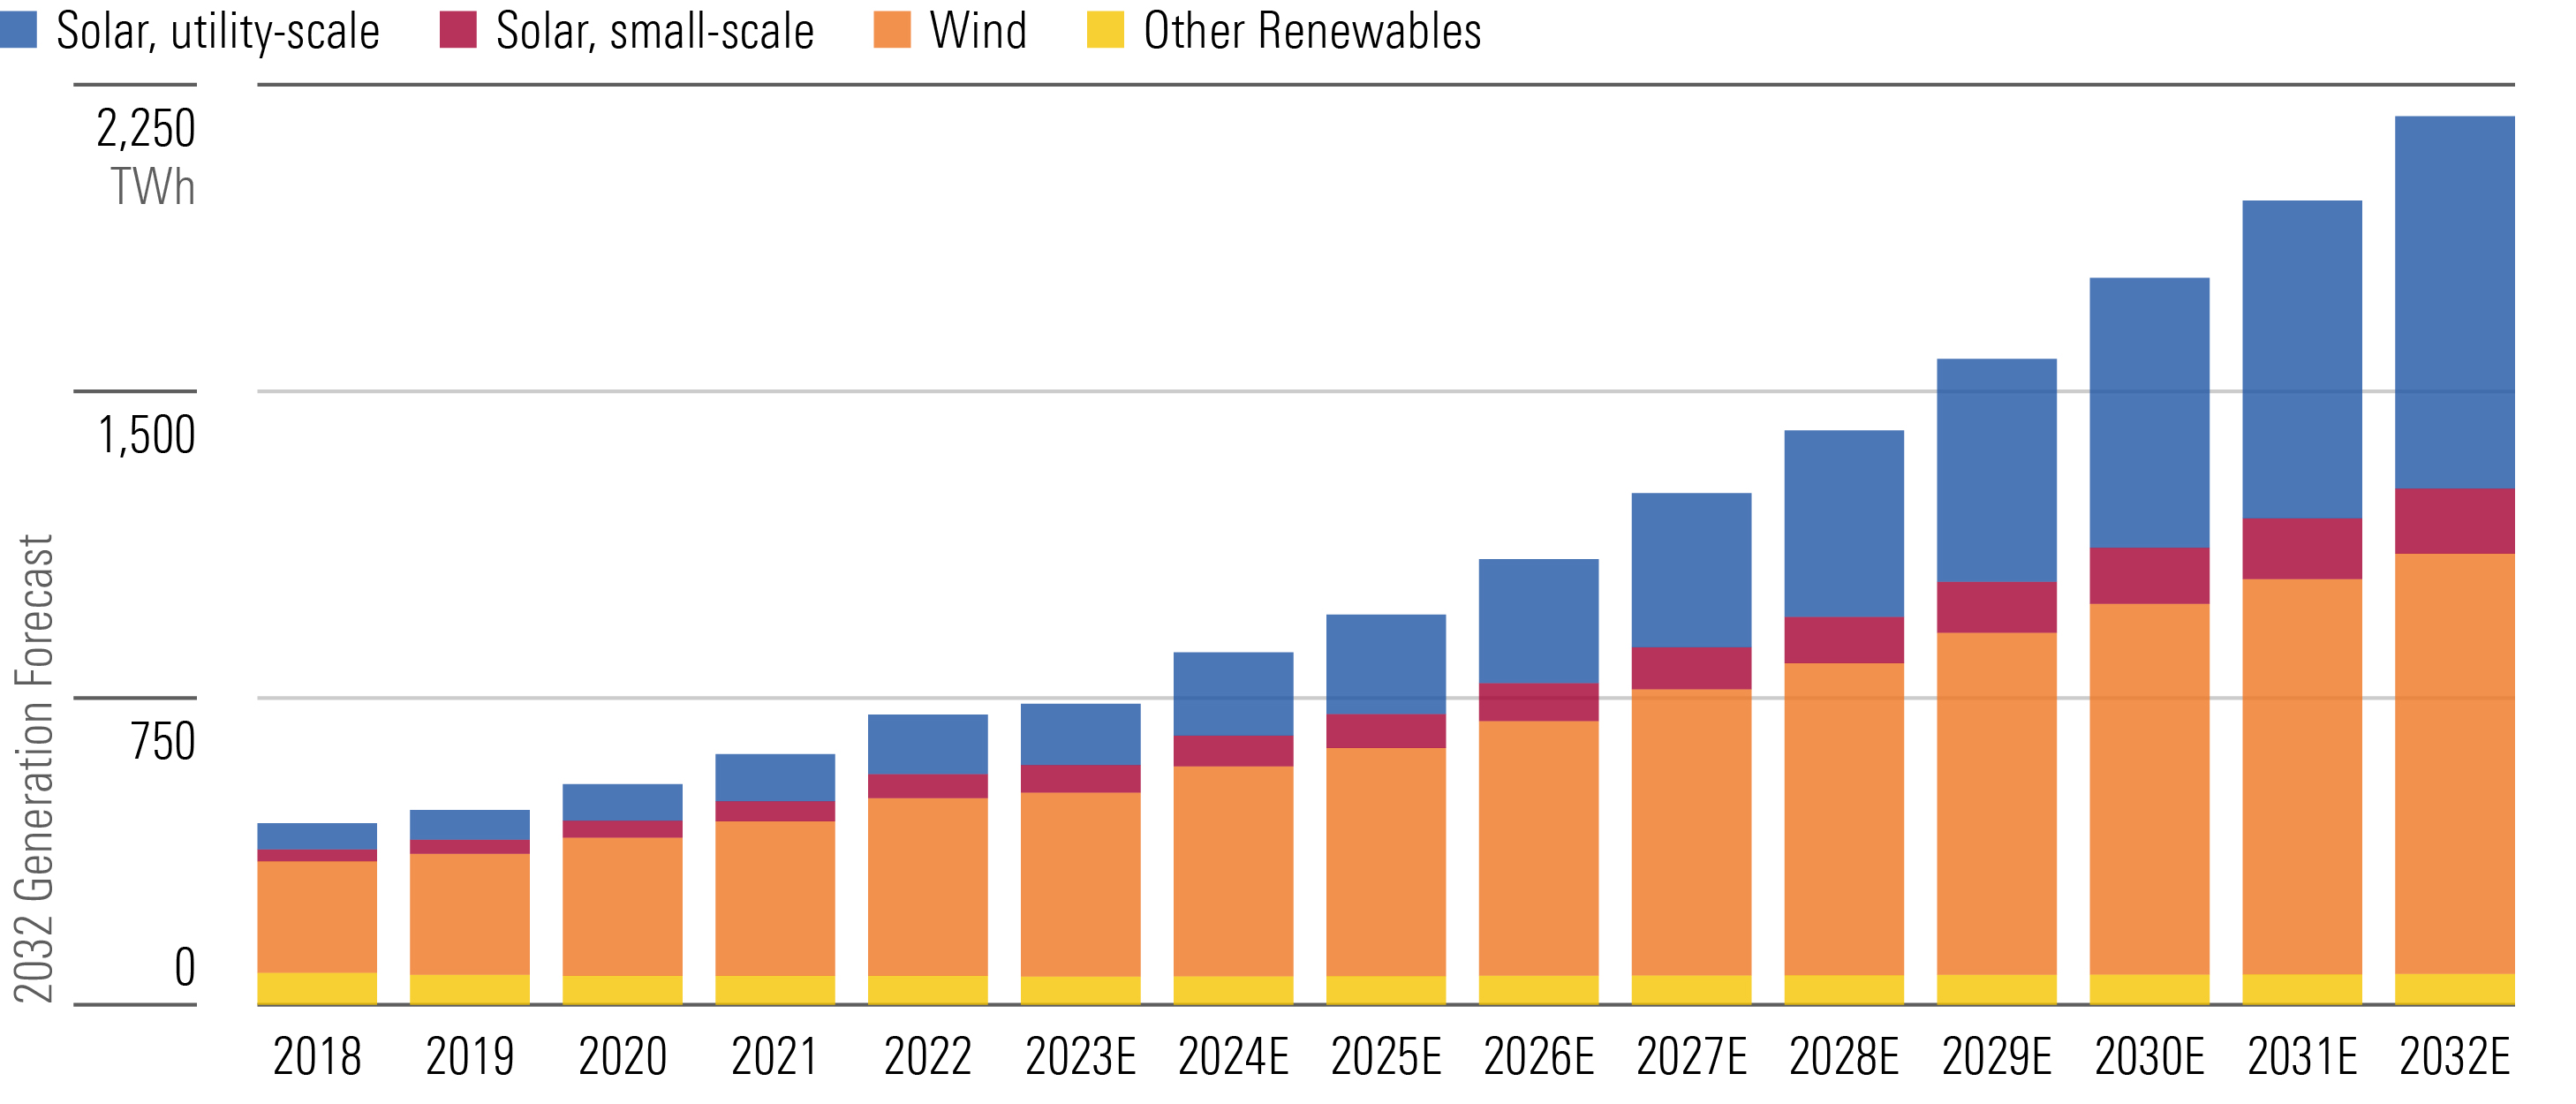 Public Policy, Economics, and Investor Support Feed Our Renewable Energy Growth Forecast